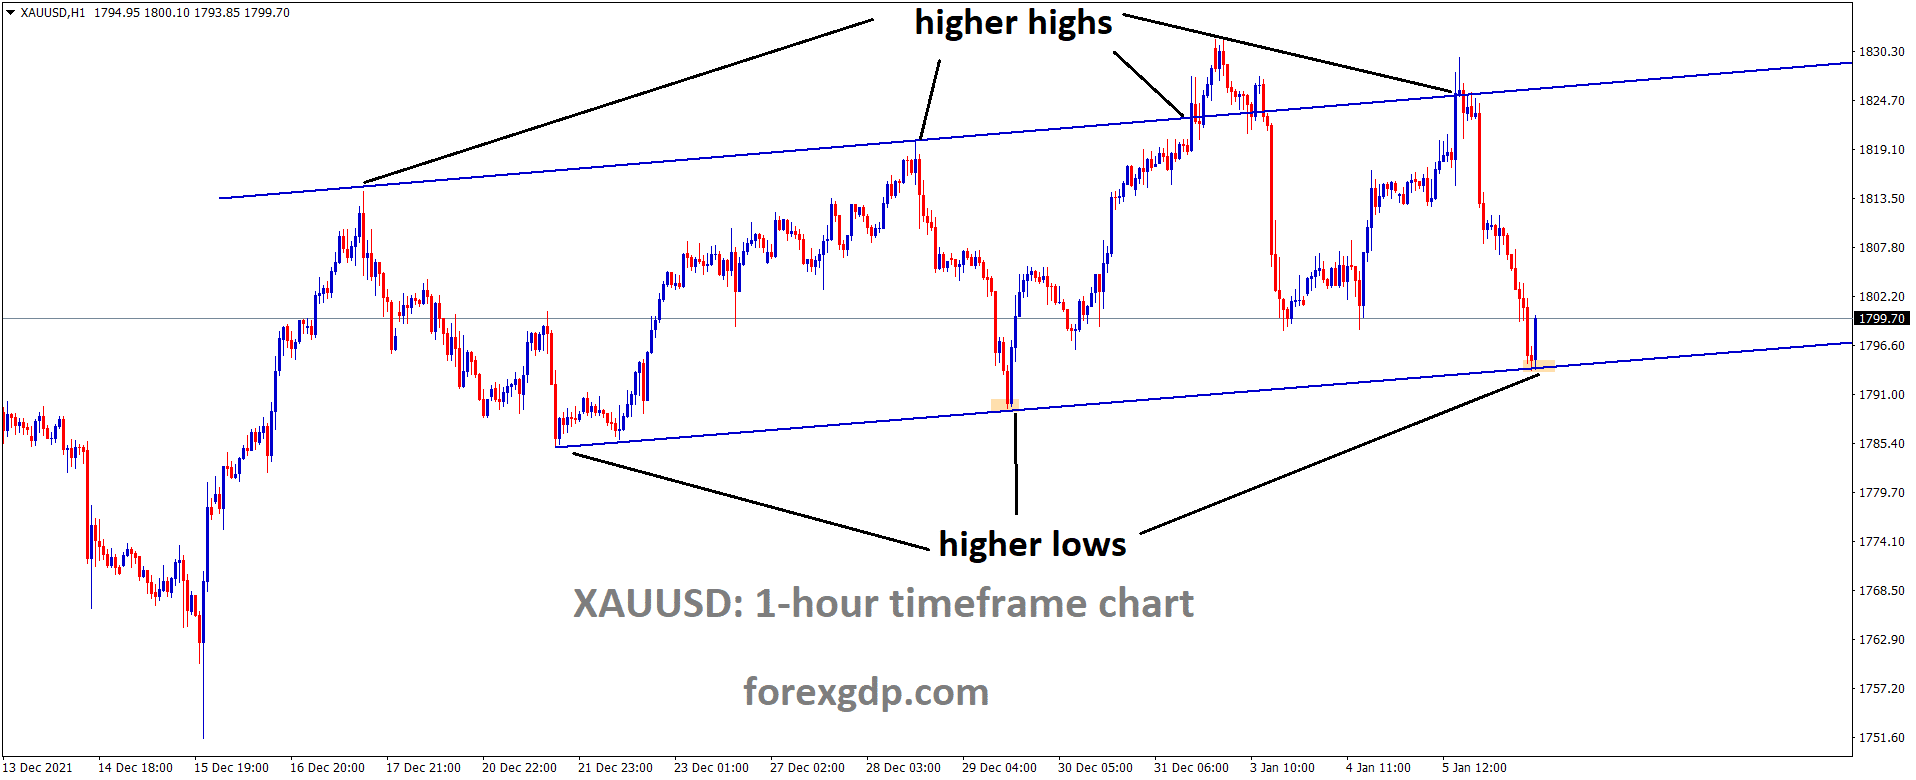 XAUUSD Gold price is moving in an Ascending channel and has rebounded from the higher low area of the ascending channel.